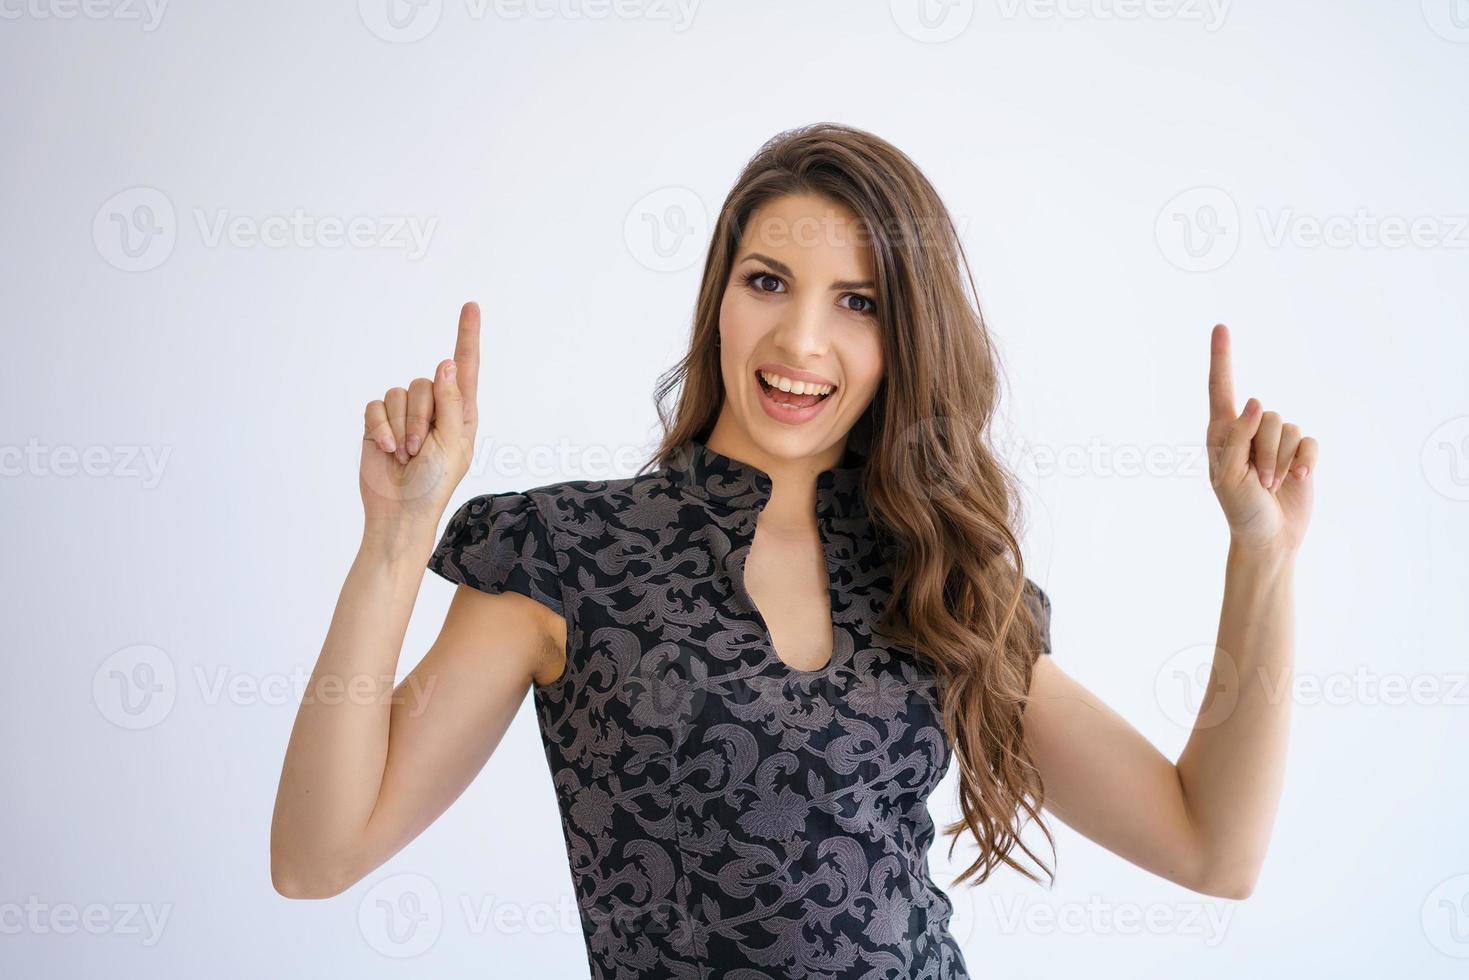 woman in a dress poses on a white background, raises her fingers up photo